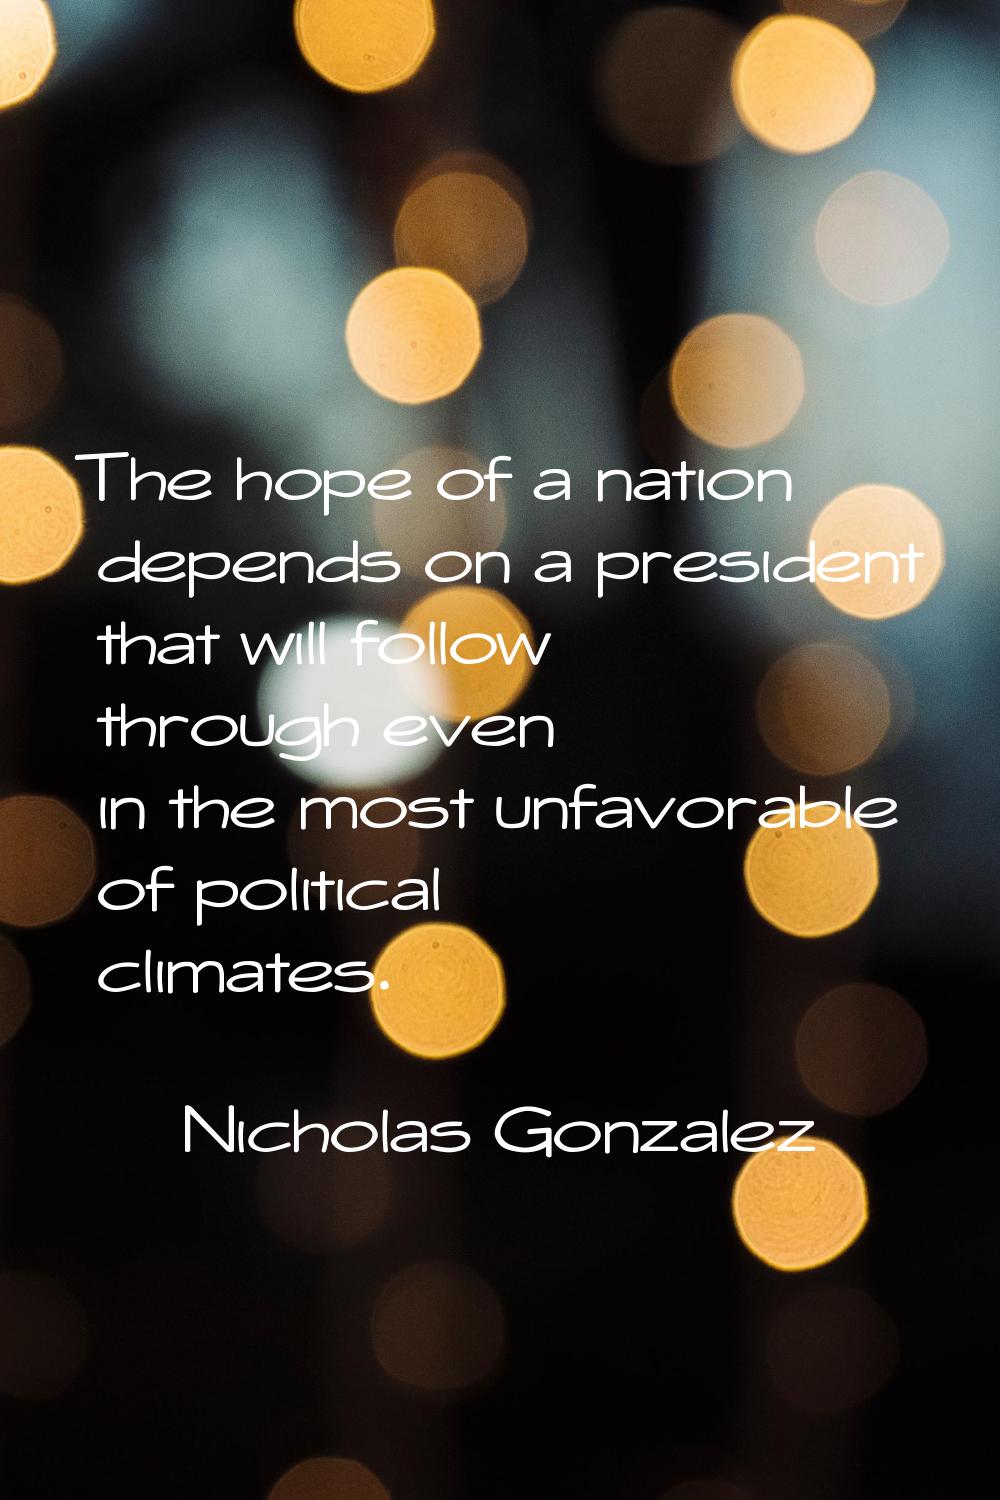 The hope of a nation depends on a president that will follow through even in the most unfavorable o